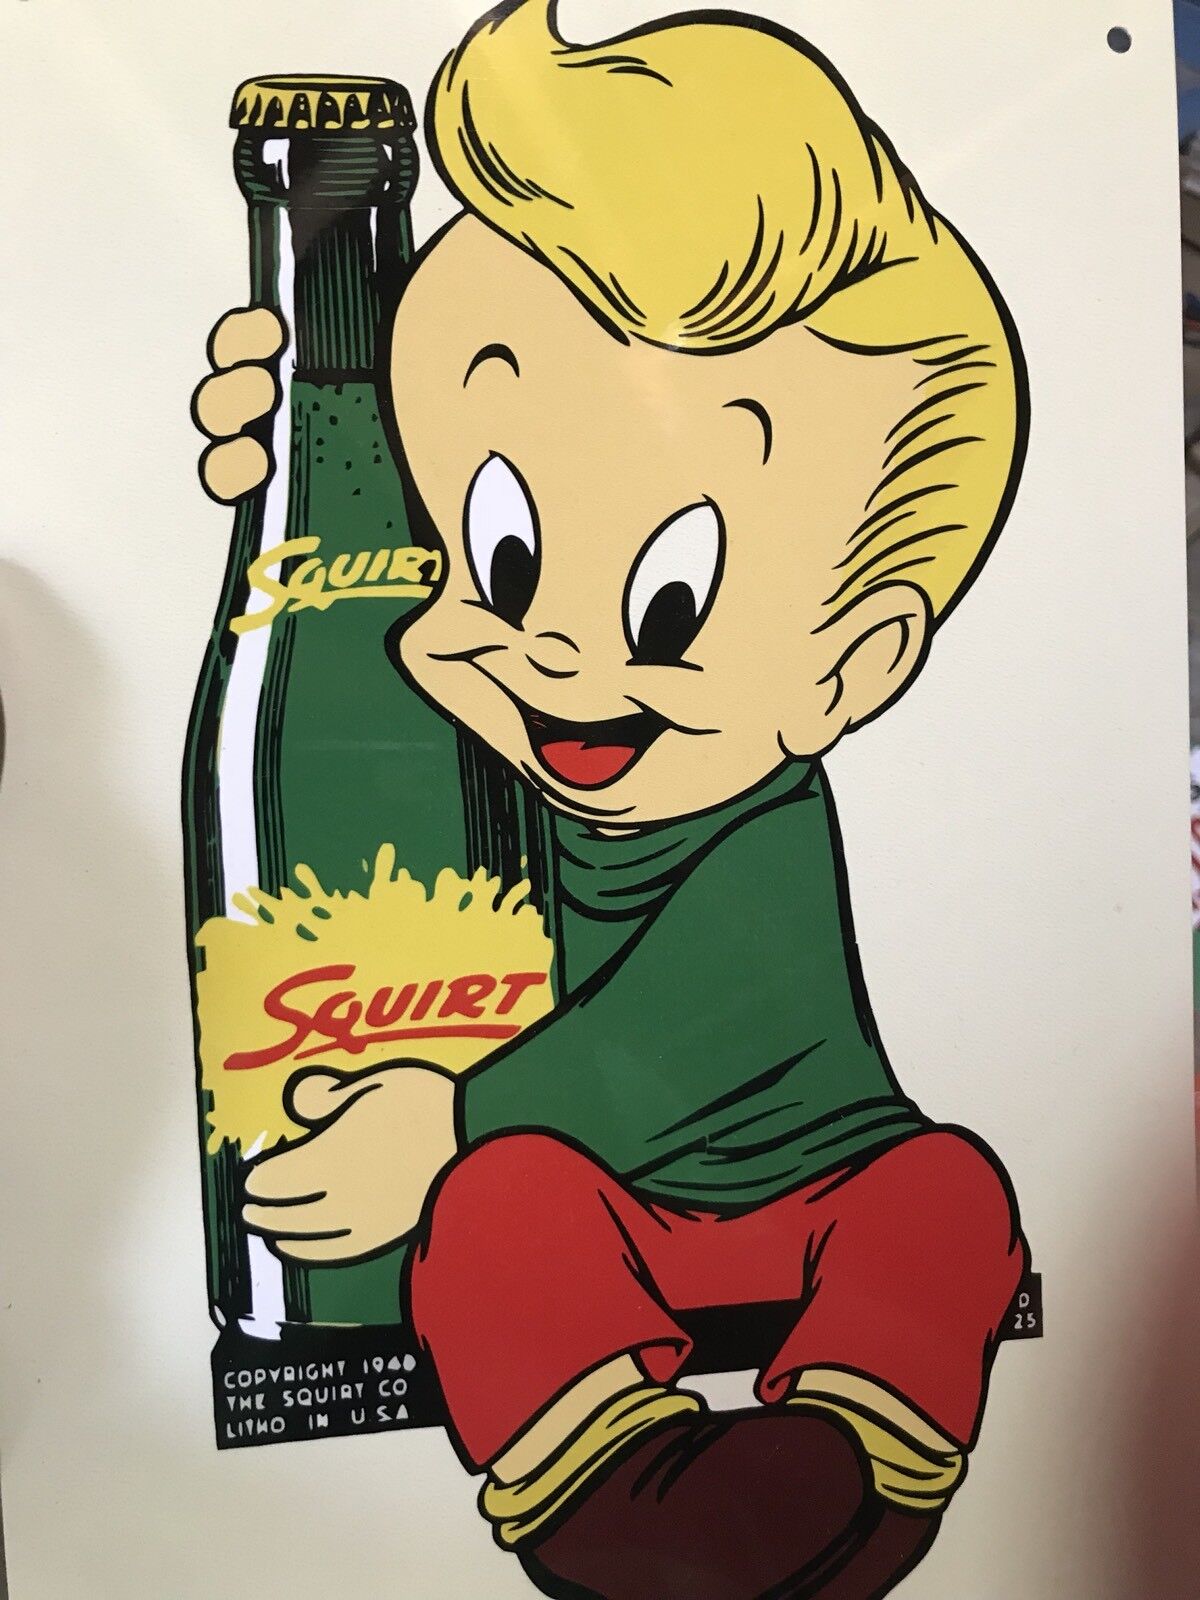 Lil Squirt Soda Pop 1940’s art vintage metal sign Reproduction